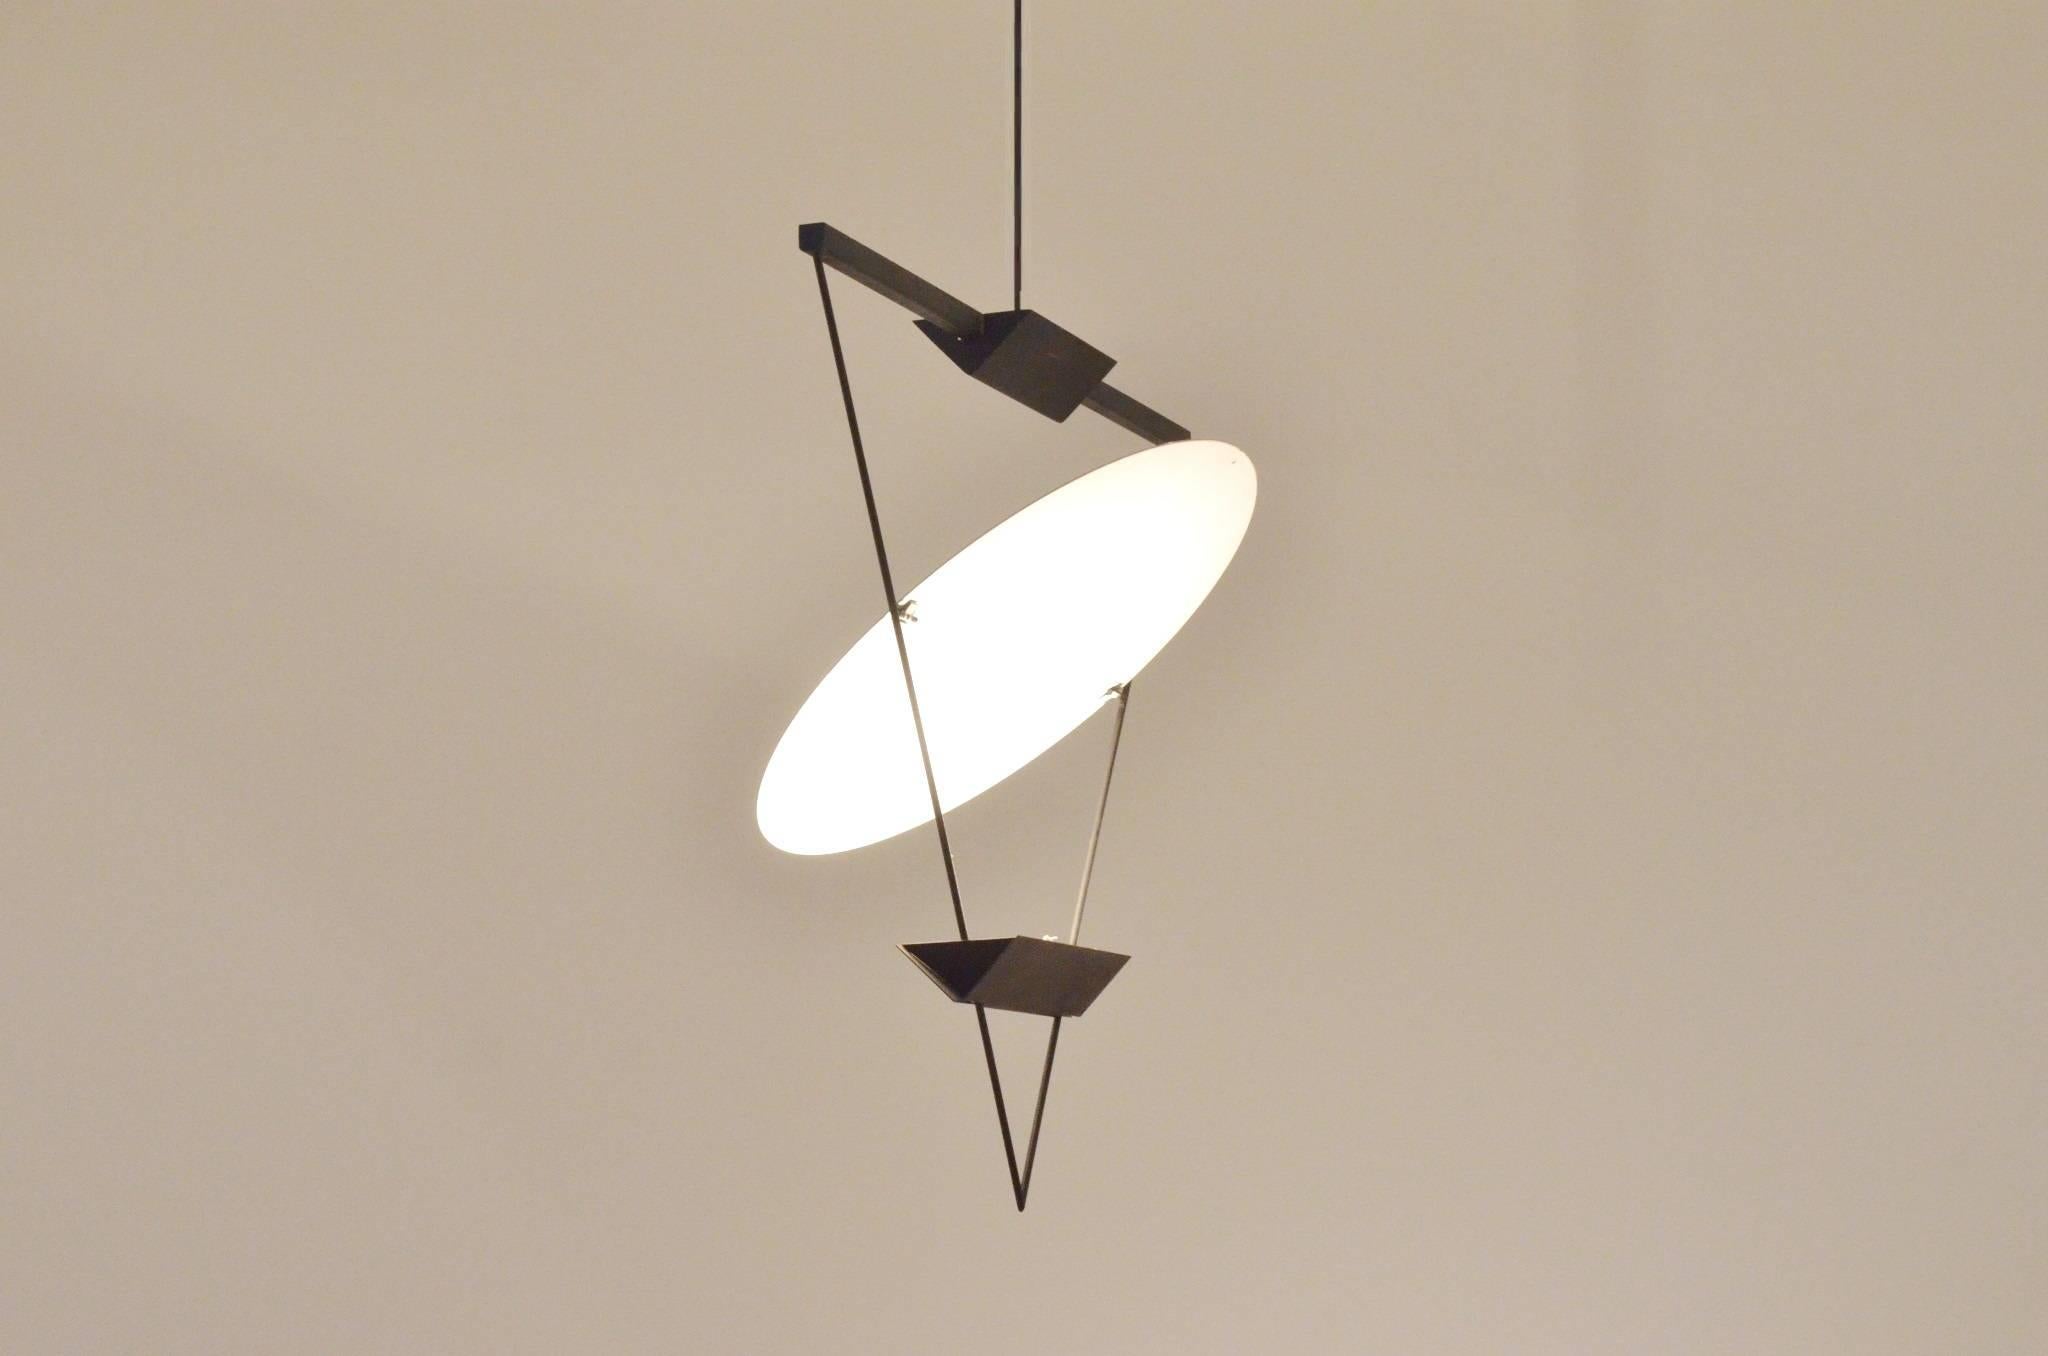 A rare triangle hanging light by Mario Botta for Artemide produced in Italy during the 1980s.
The lamp has two halogen up lighters and large round white reflector.
Geometrical shapes with a study in geometry and reflection.